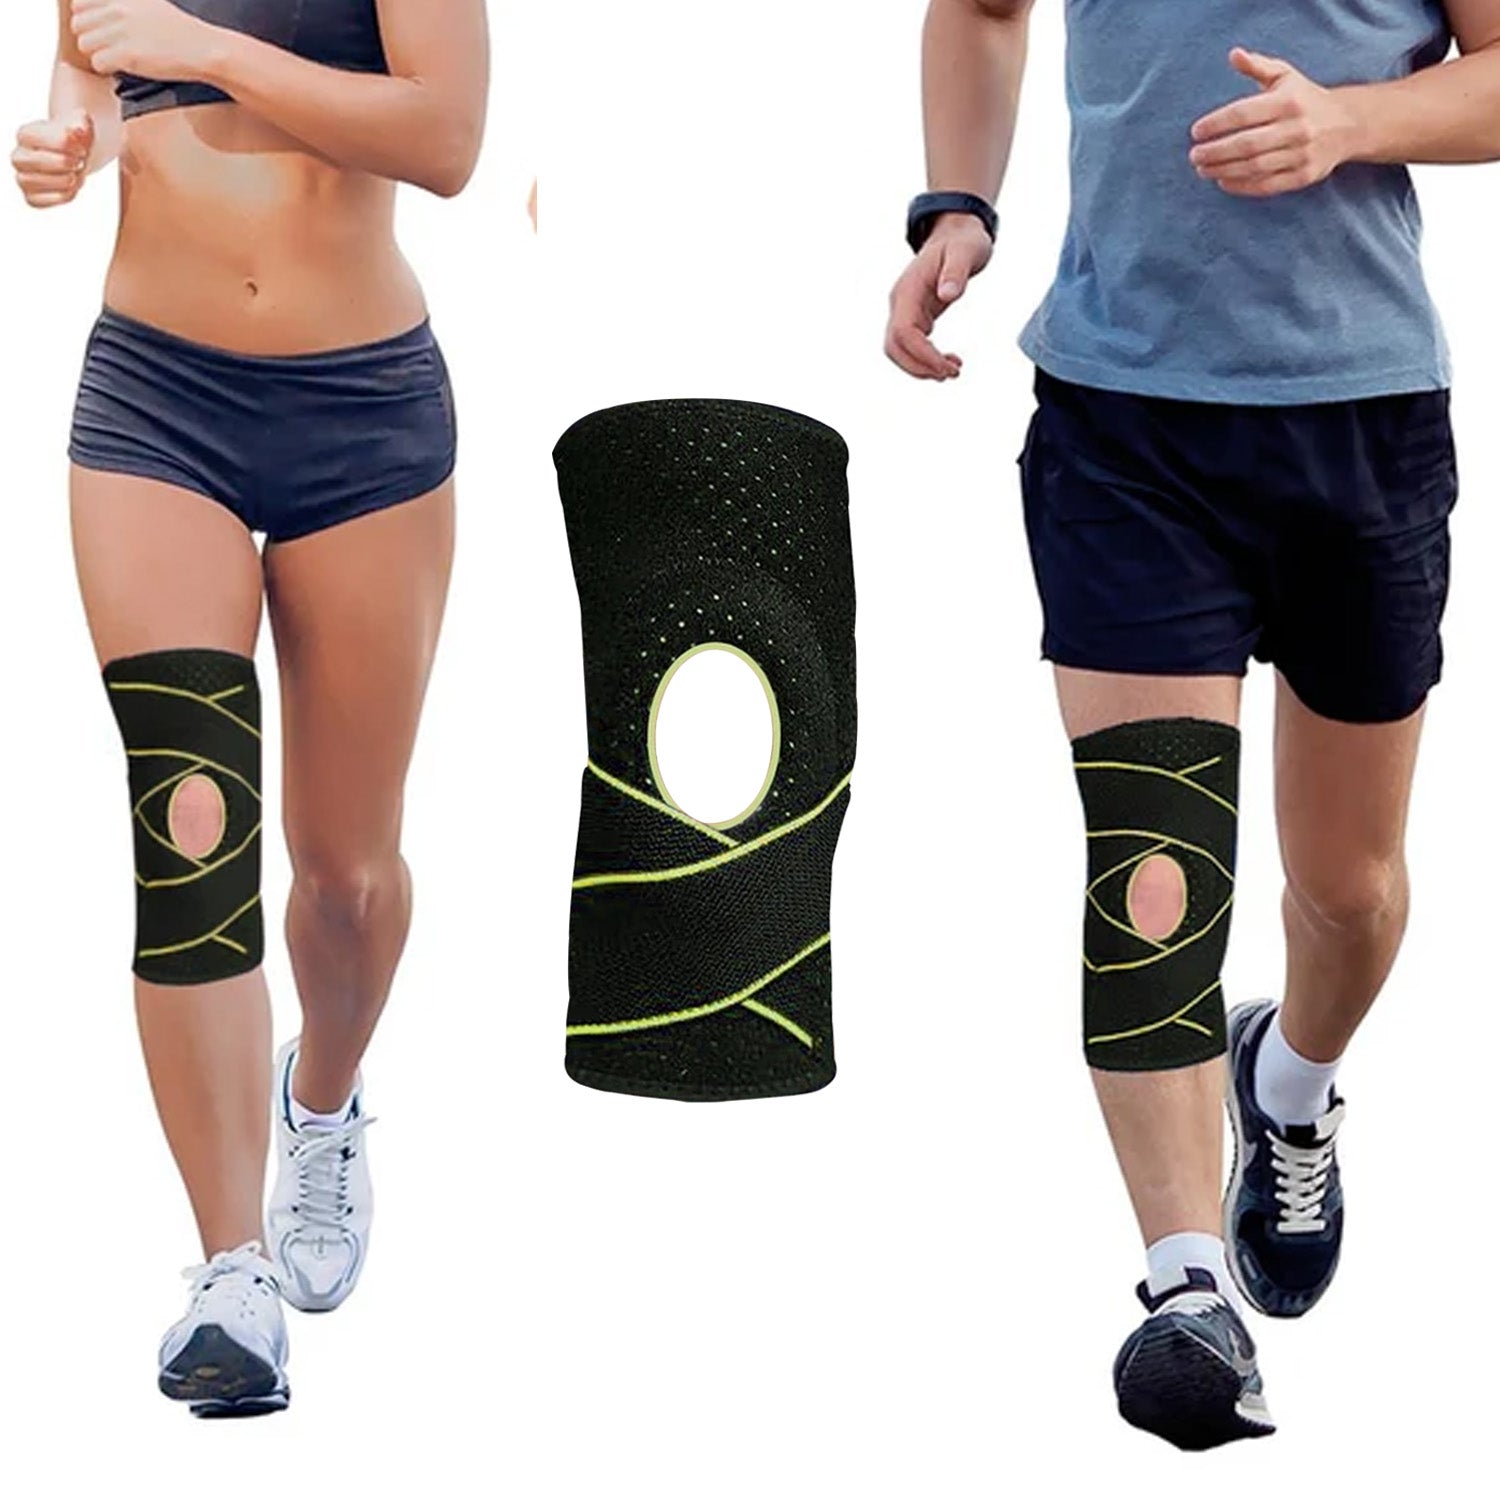 Copper-Infused Knee Compression Sleeve with Adjustable Straps